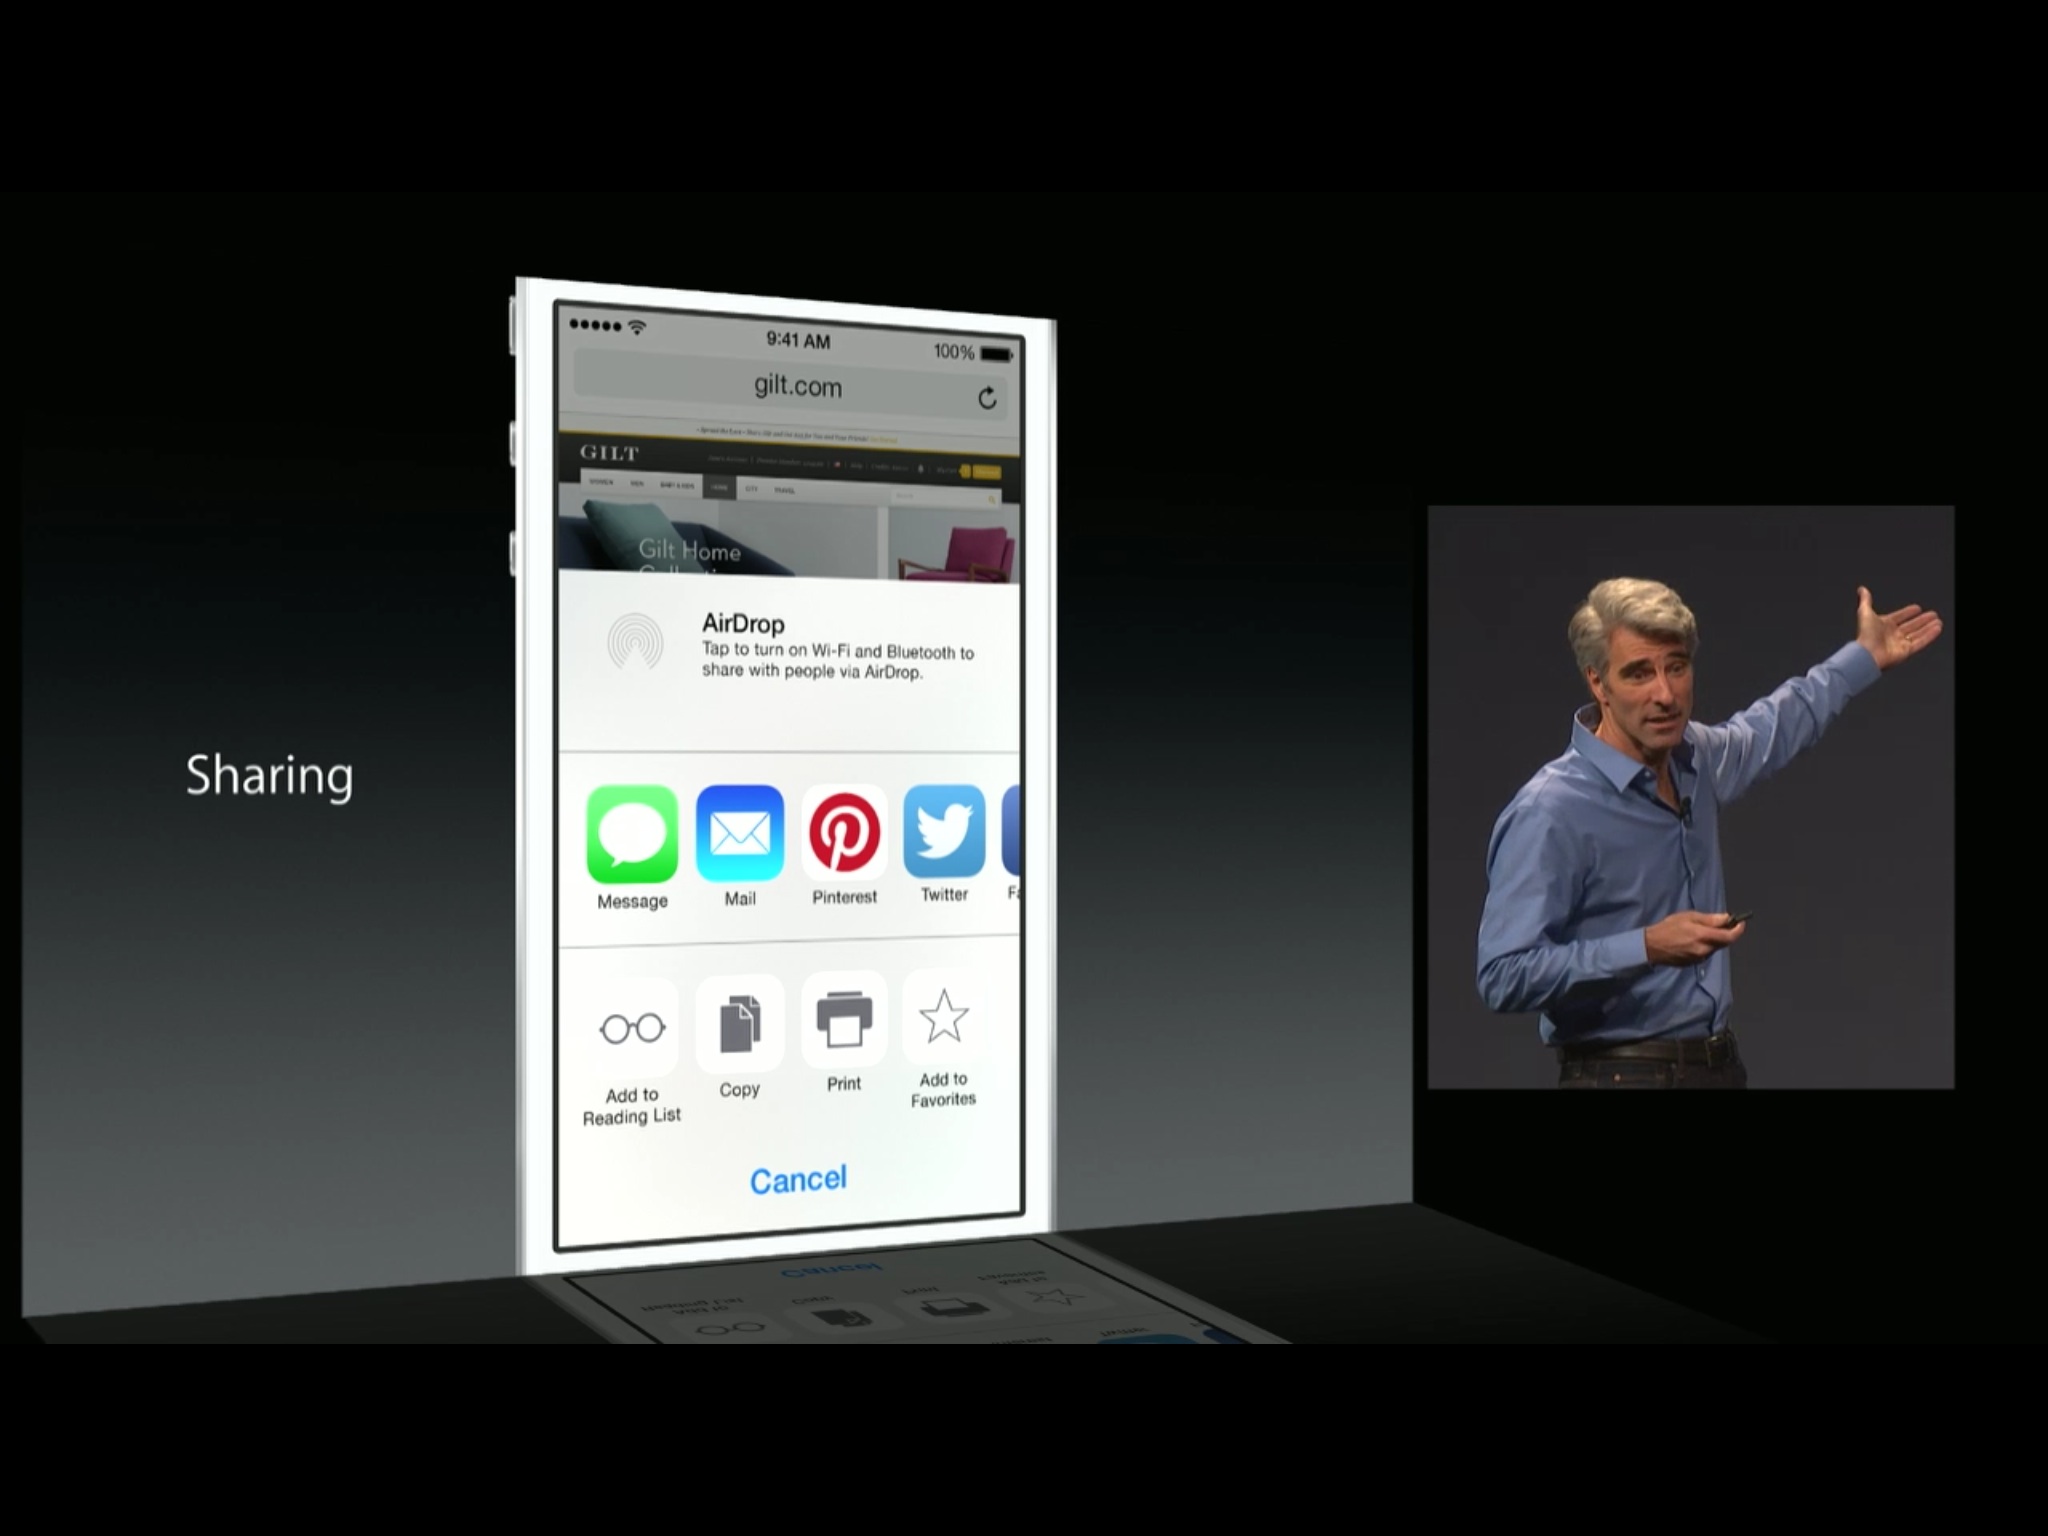 Sharing in iOS 8: Explained